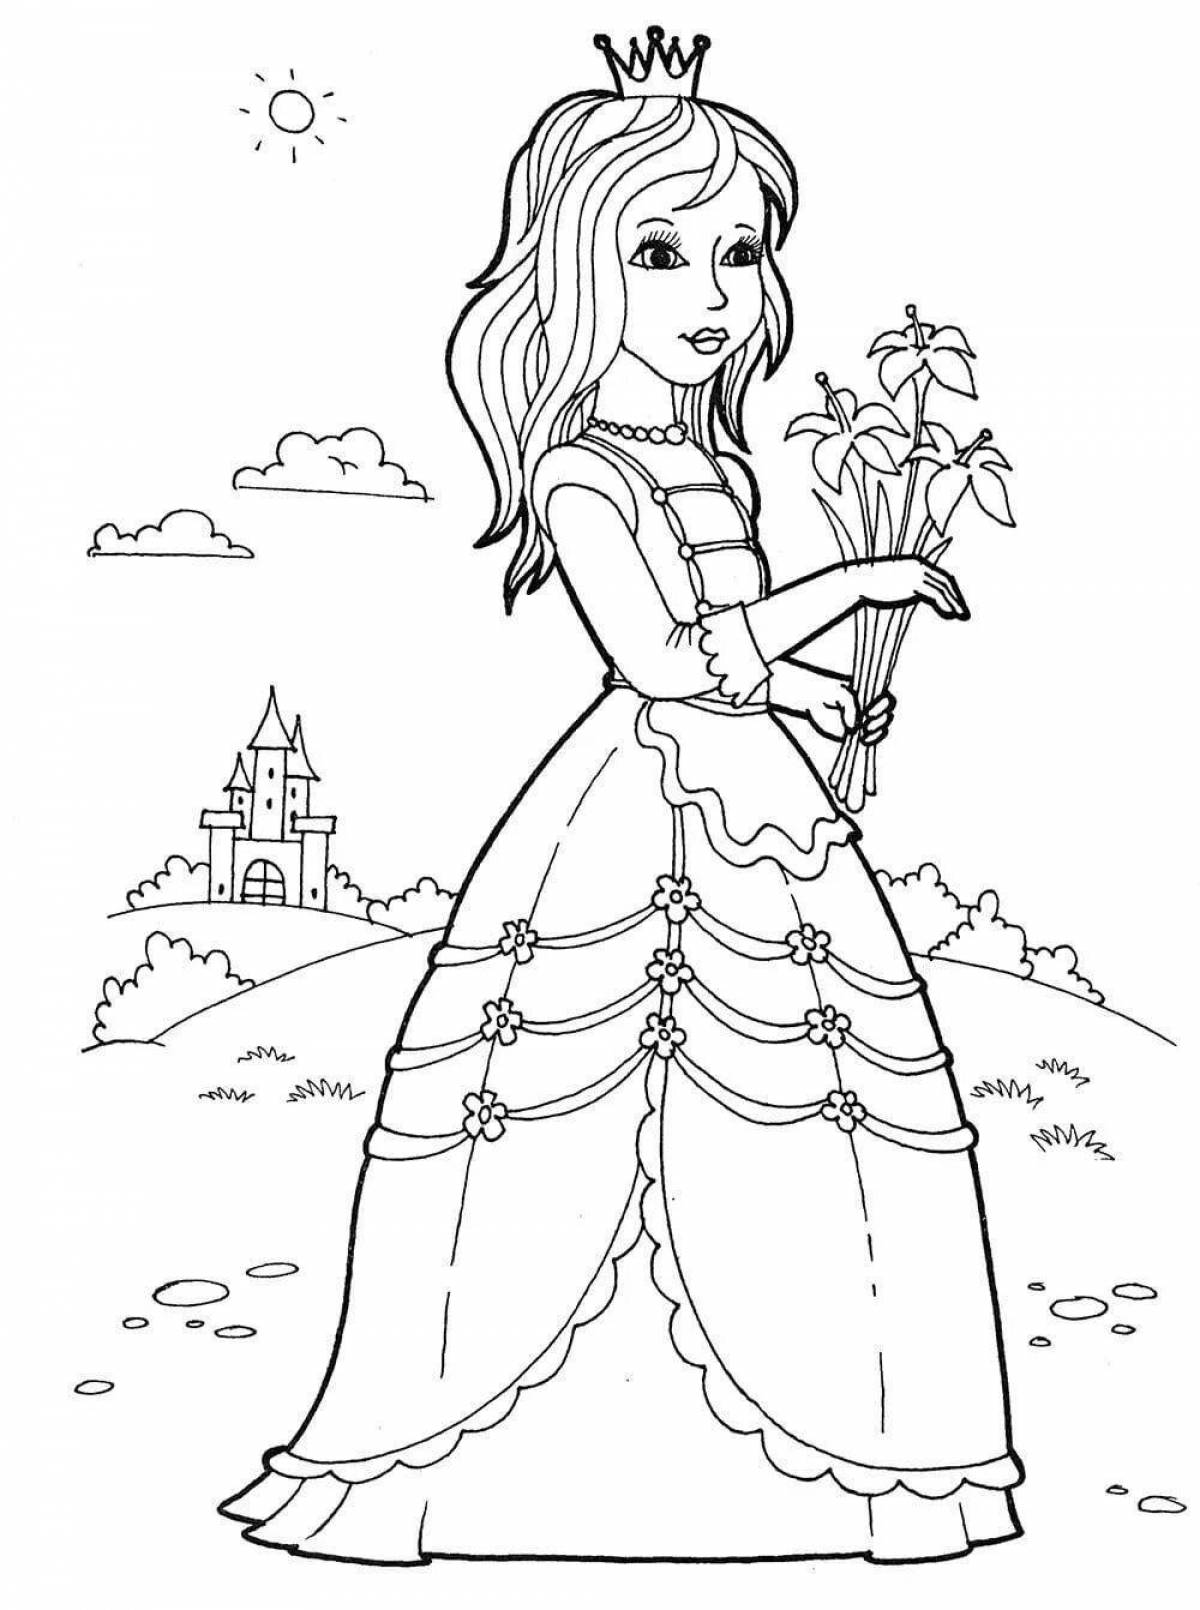 Amazing coloring book for 10 year old girls